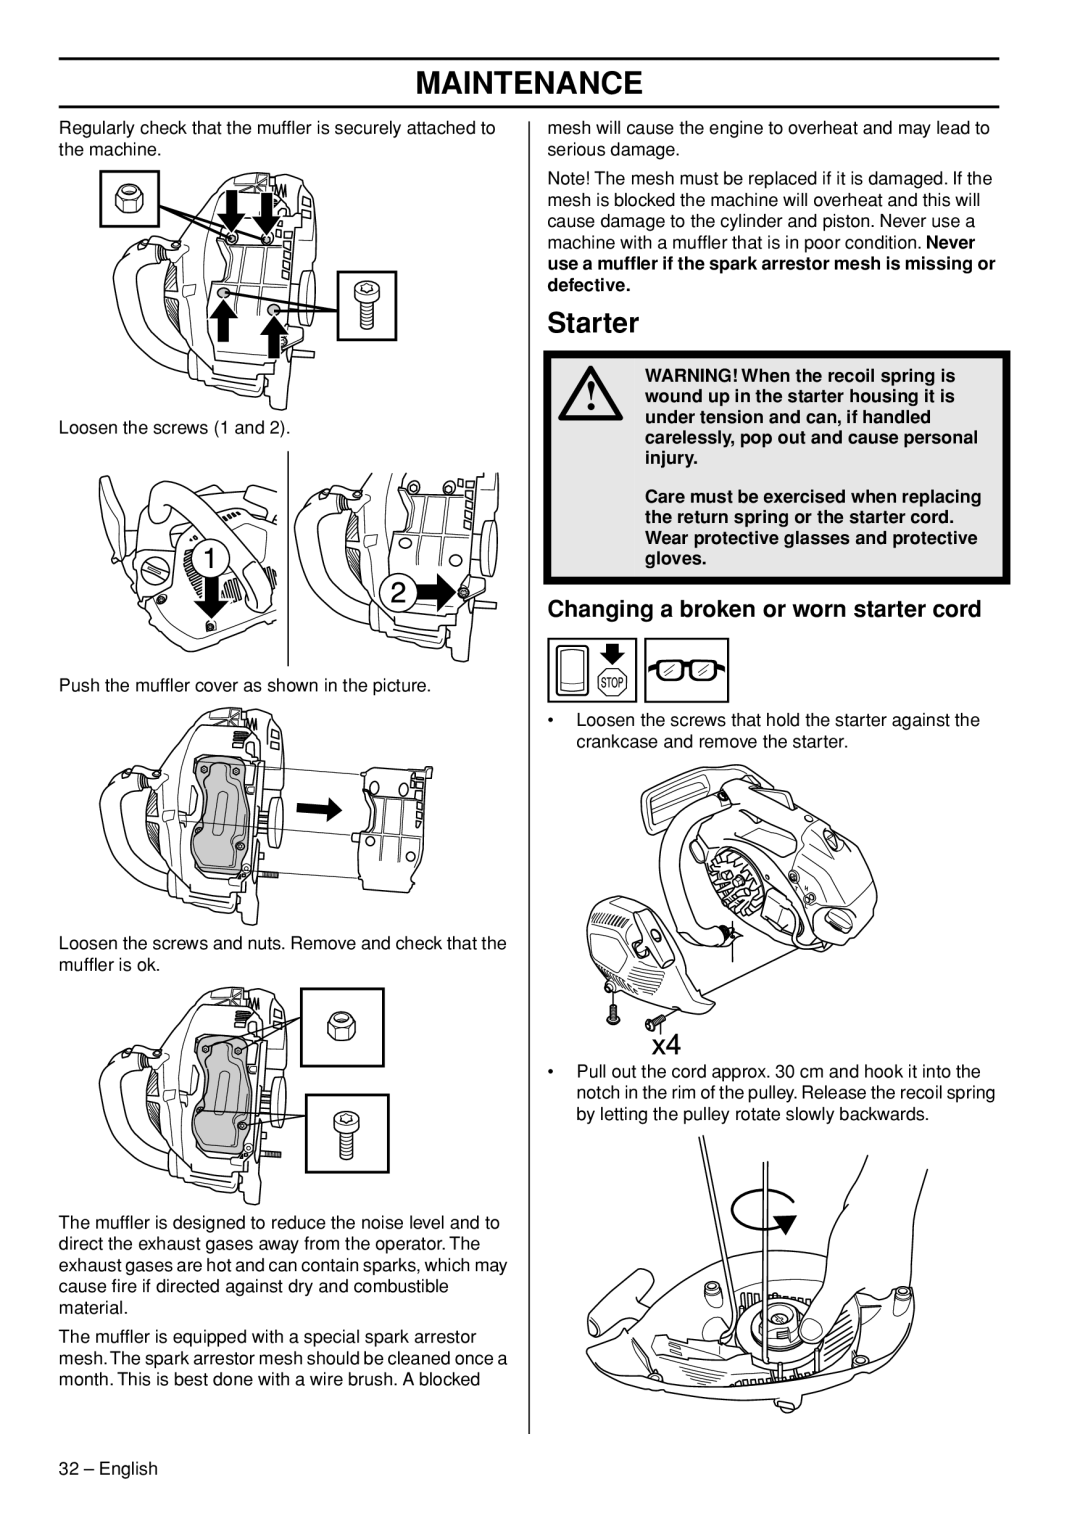 Husqvarna T435 manual Starter, Changing a broken or worn starter cord, WARNING! When the recoil spring is, Maintenance 